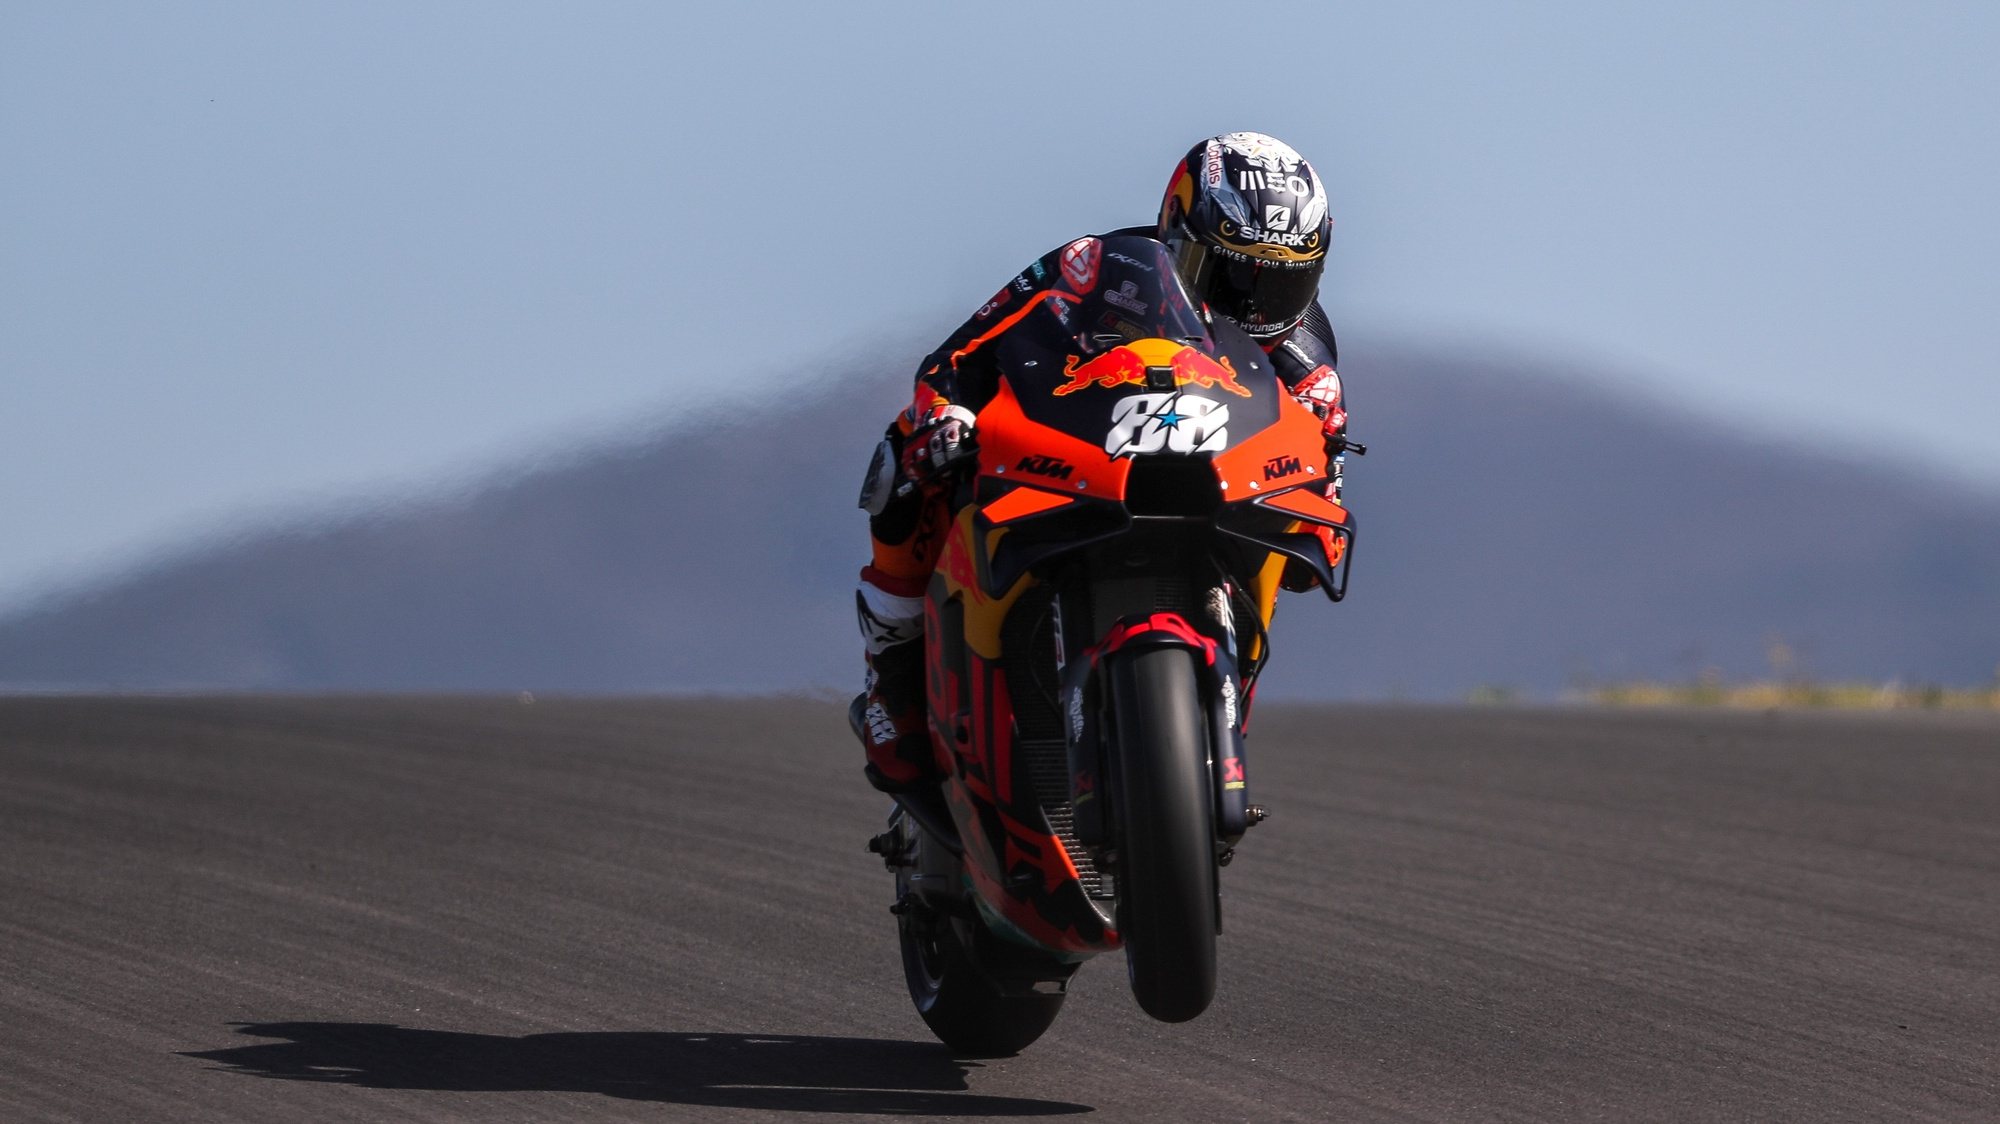 Portuguese rider of Red Bull KTM Factory Racing team, Miguel Oliveira,   during the third MotoGP free training session for the Motorcycling Grand Prix of Portugal at Algarve International race track, south of Portugal, 17 April 2021. The Motorcycling Grand Prix of Portugal will take place on 18 April 2021.JOSE SENA GOULAO/LUSA